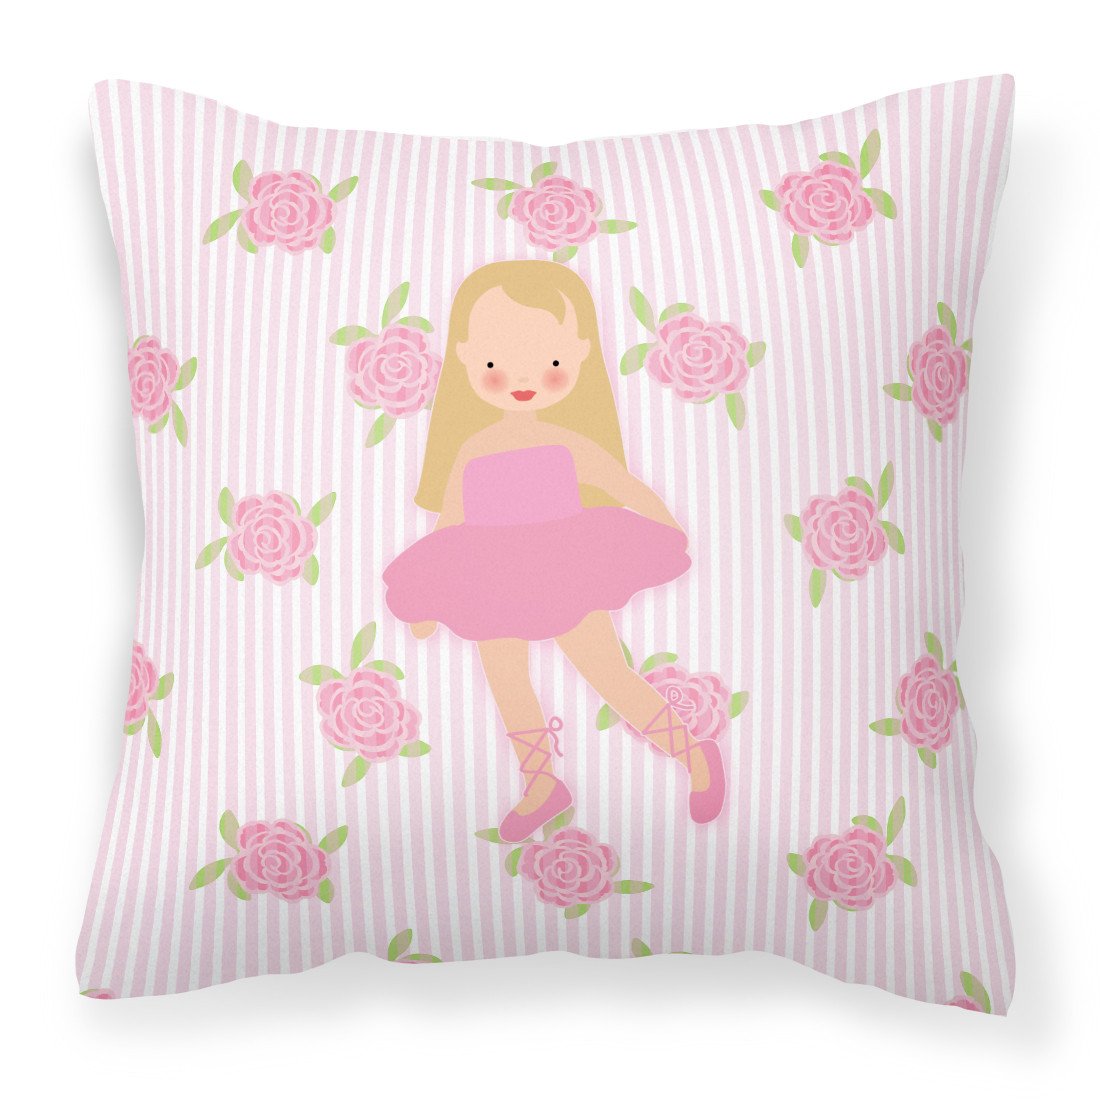 Ballerina Long Haired Blonde Fabric Decorative Pillow BB5185PW1818 by Caroline's Treasures